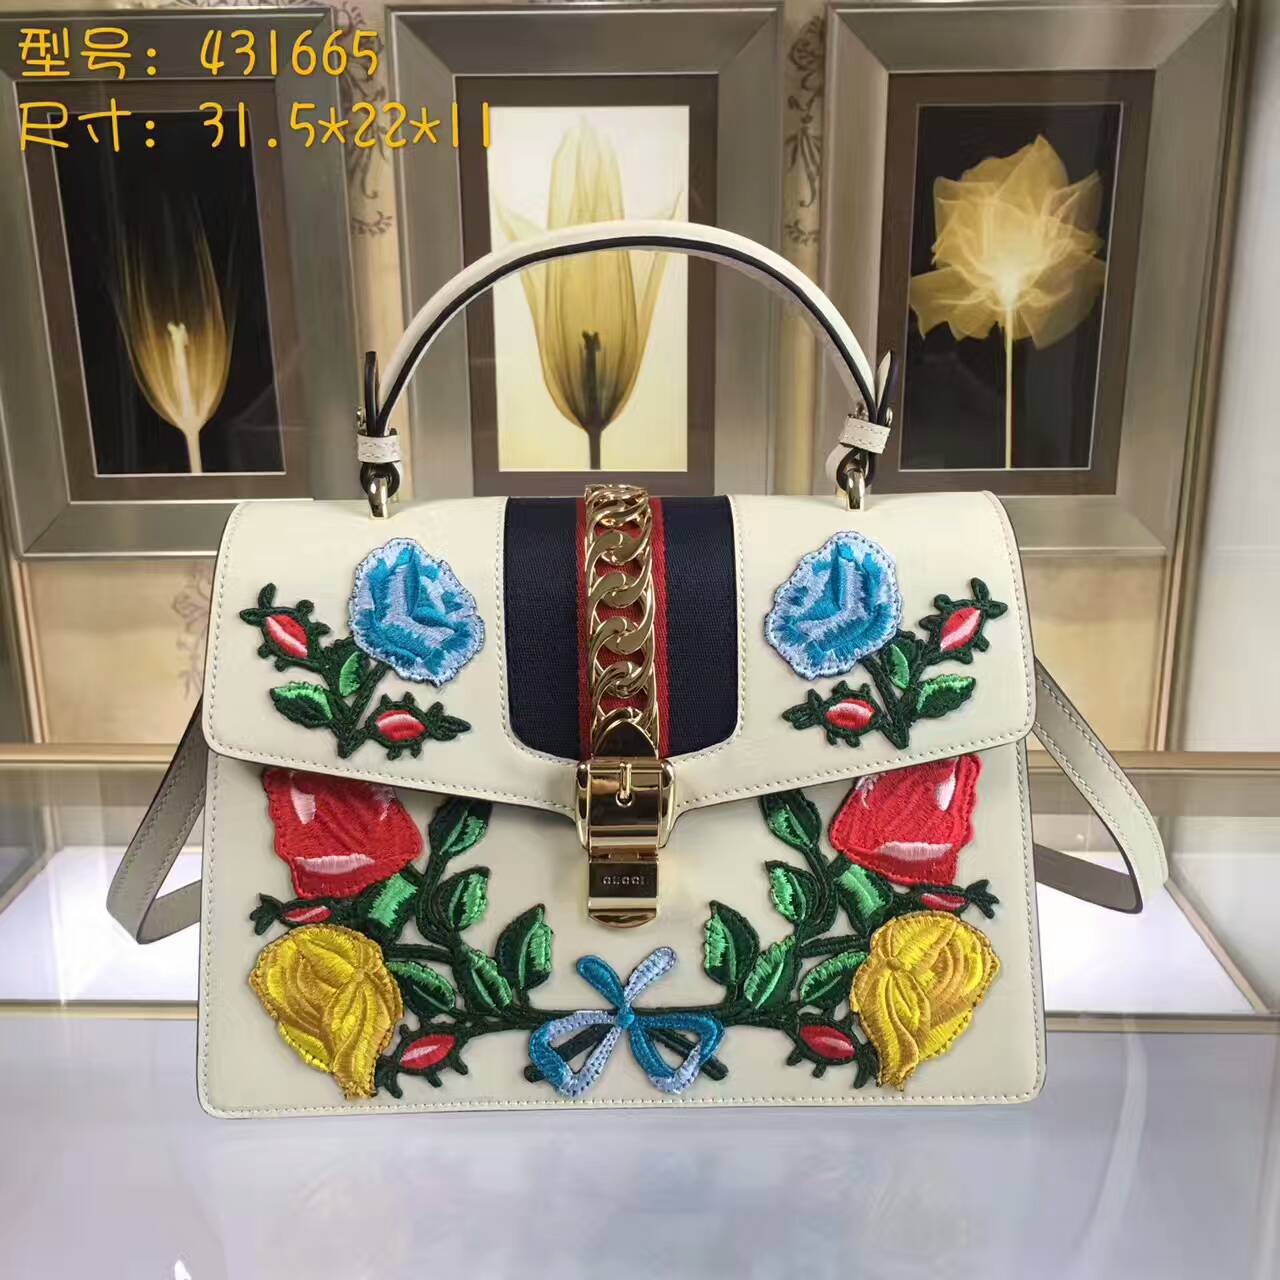 Túi Xách Gucci Sylvie Embroidered Leather Top Handle Bag-431665-TXGC024